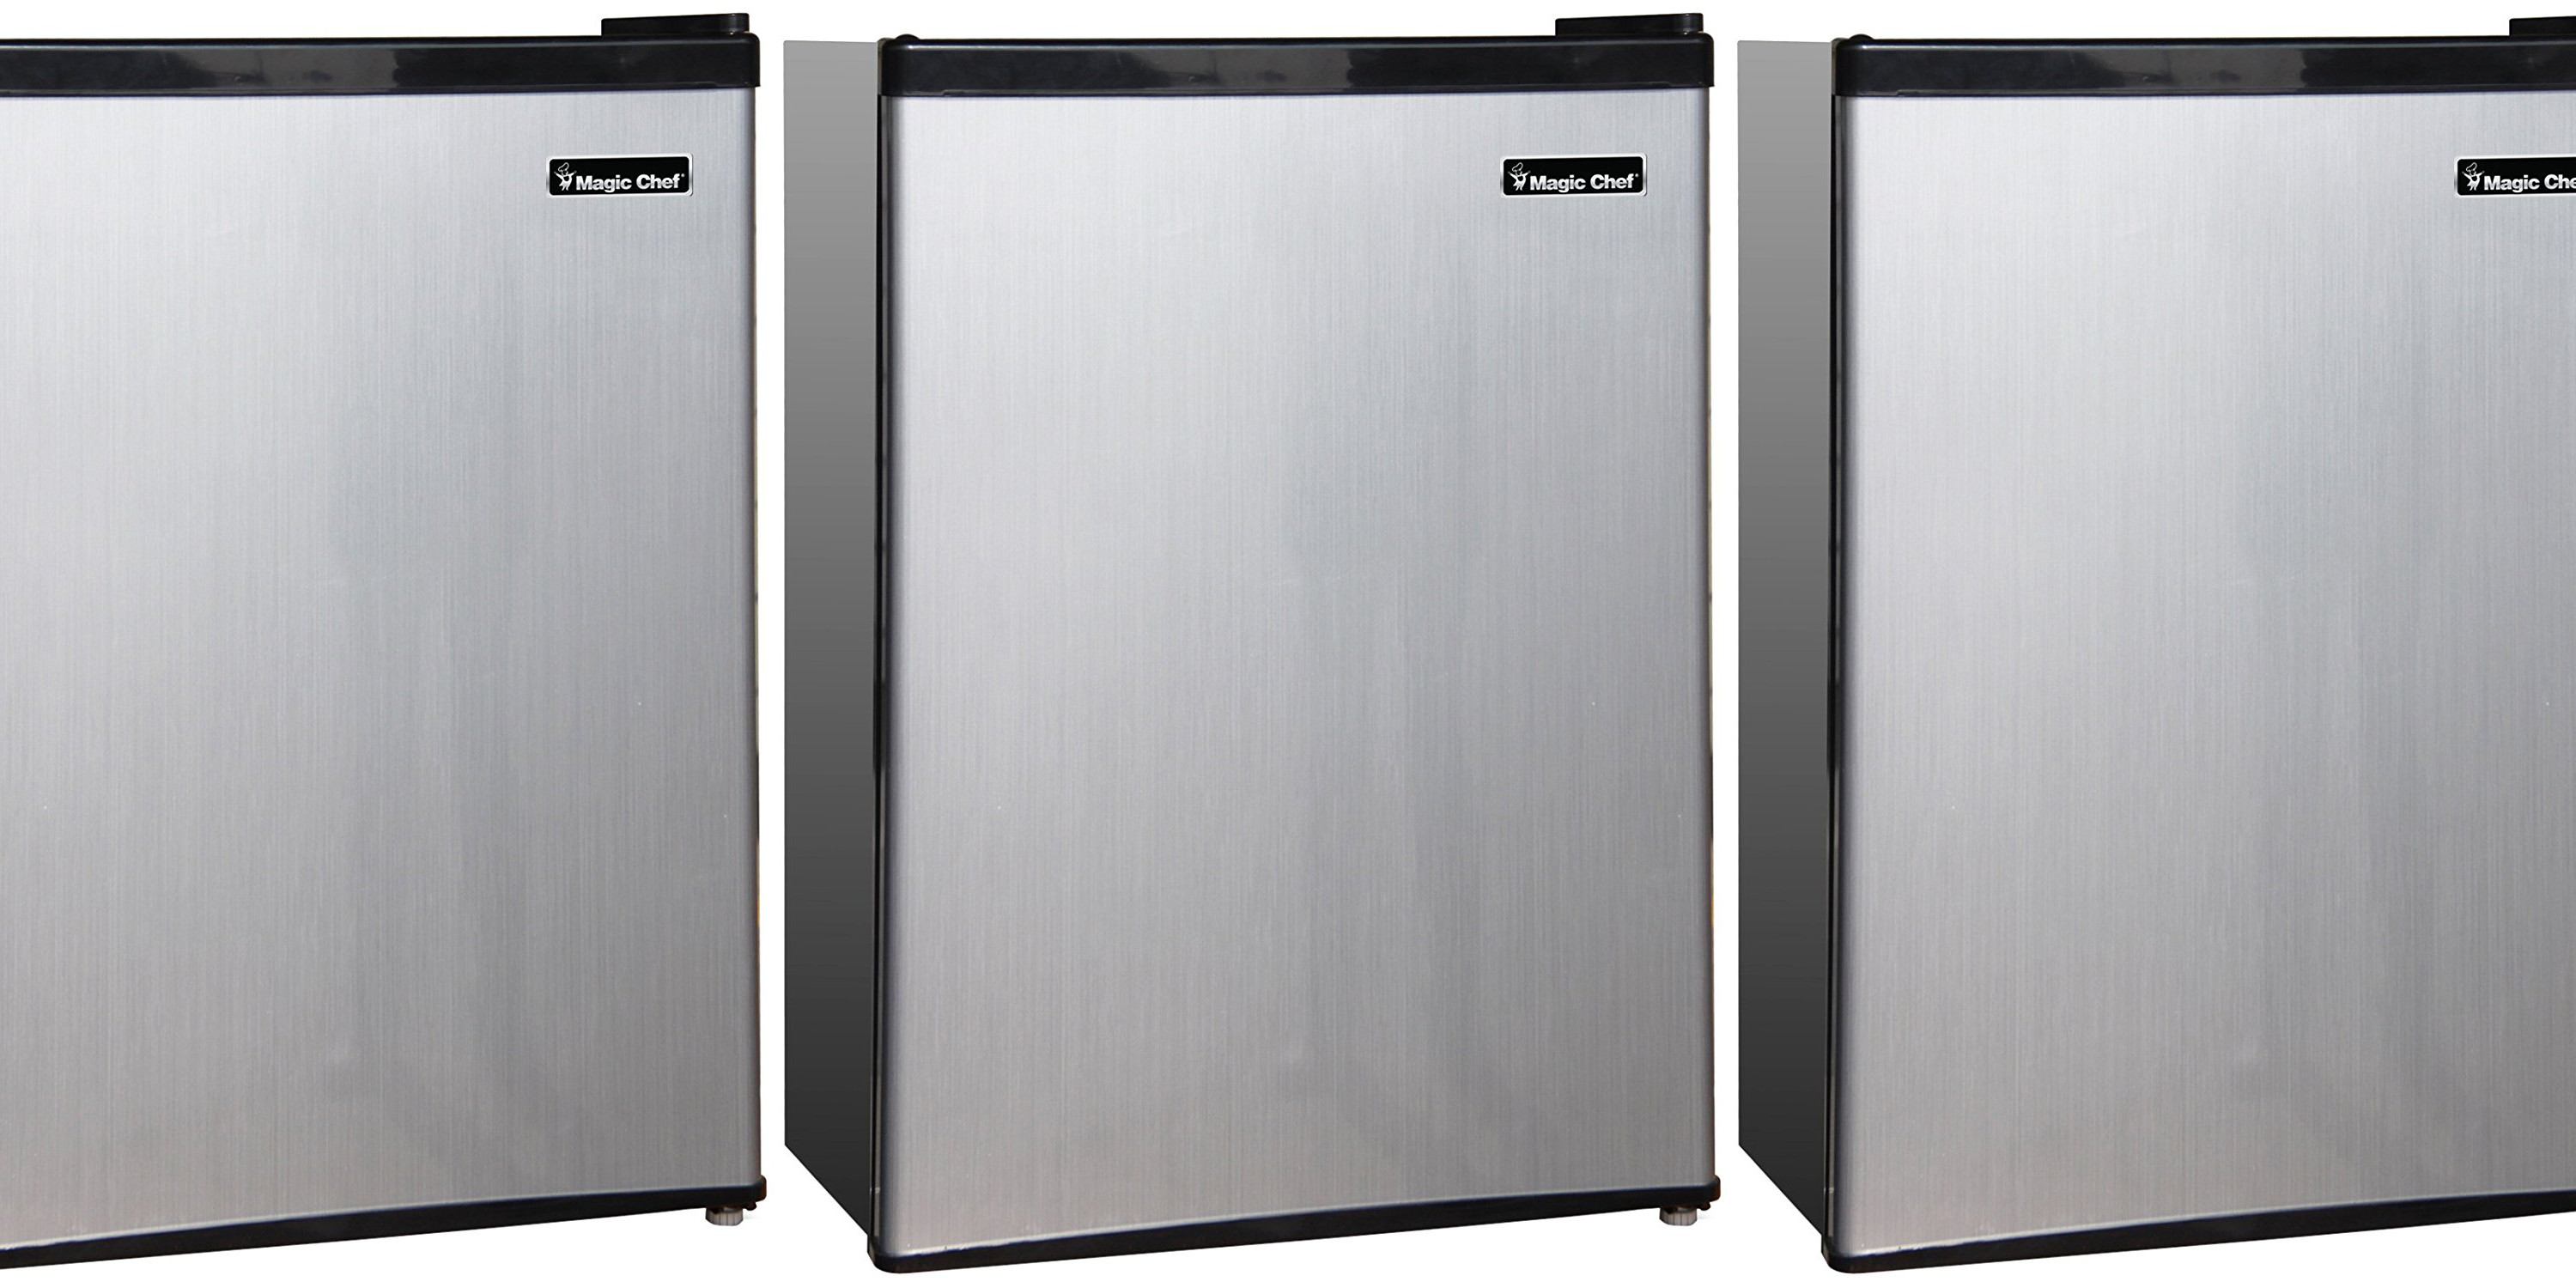 Pick up a brand new Magic Chef Mini Fridge today for just $110 shipped  (Reg. up to $160)